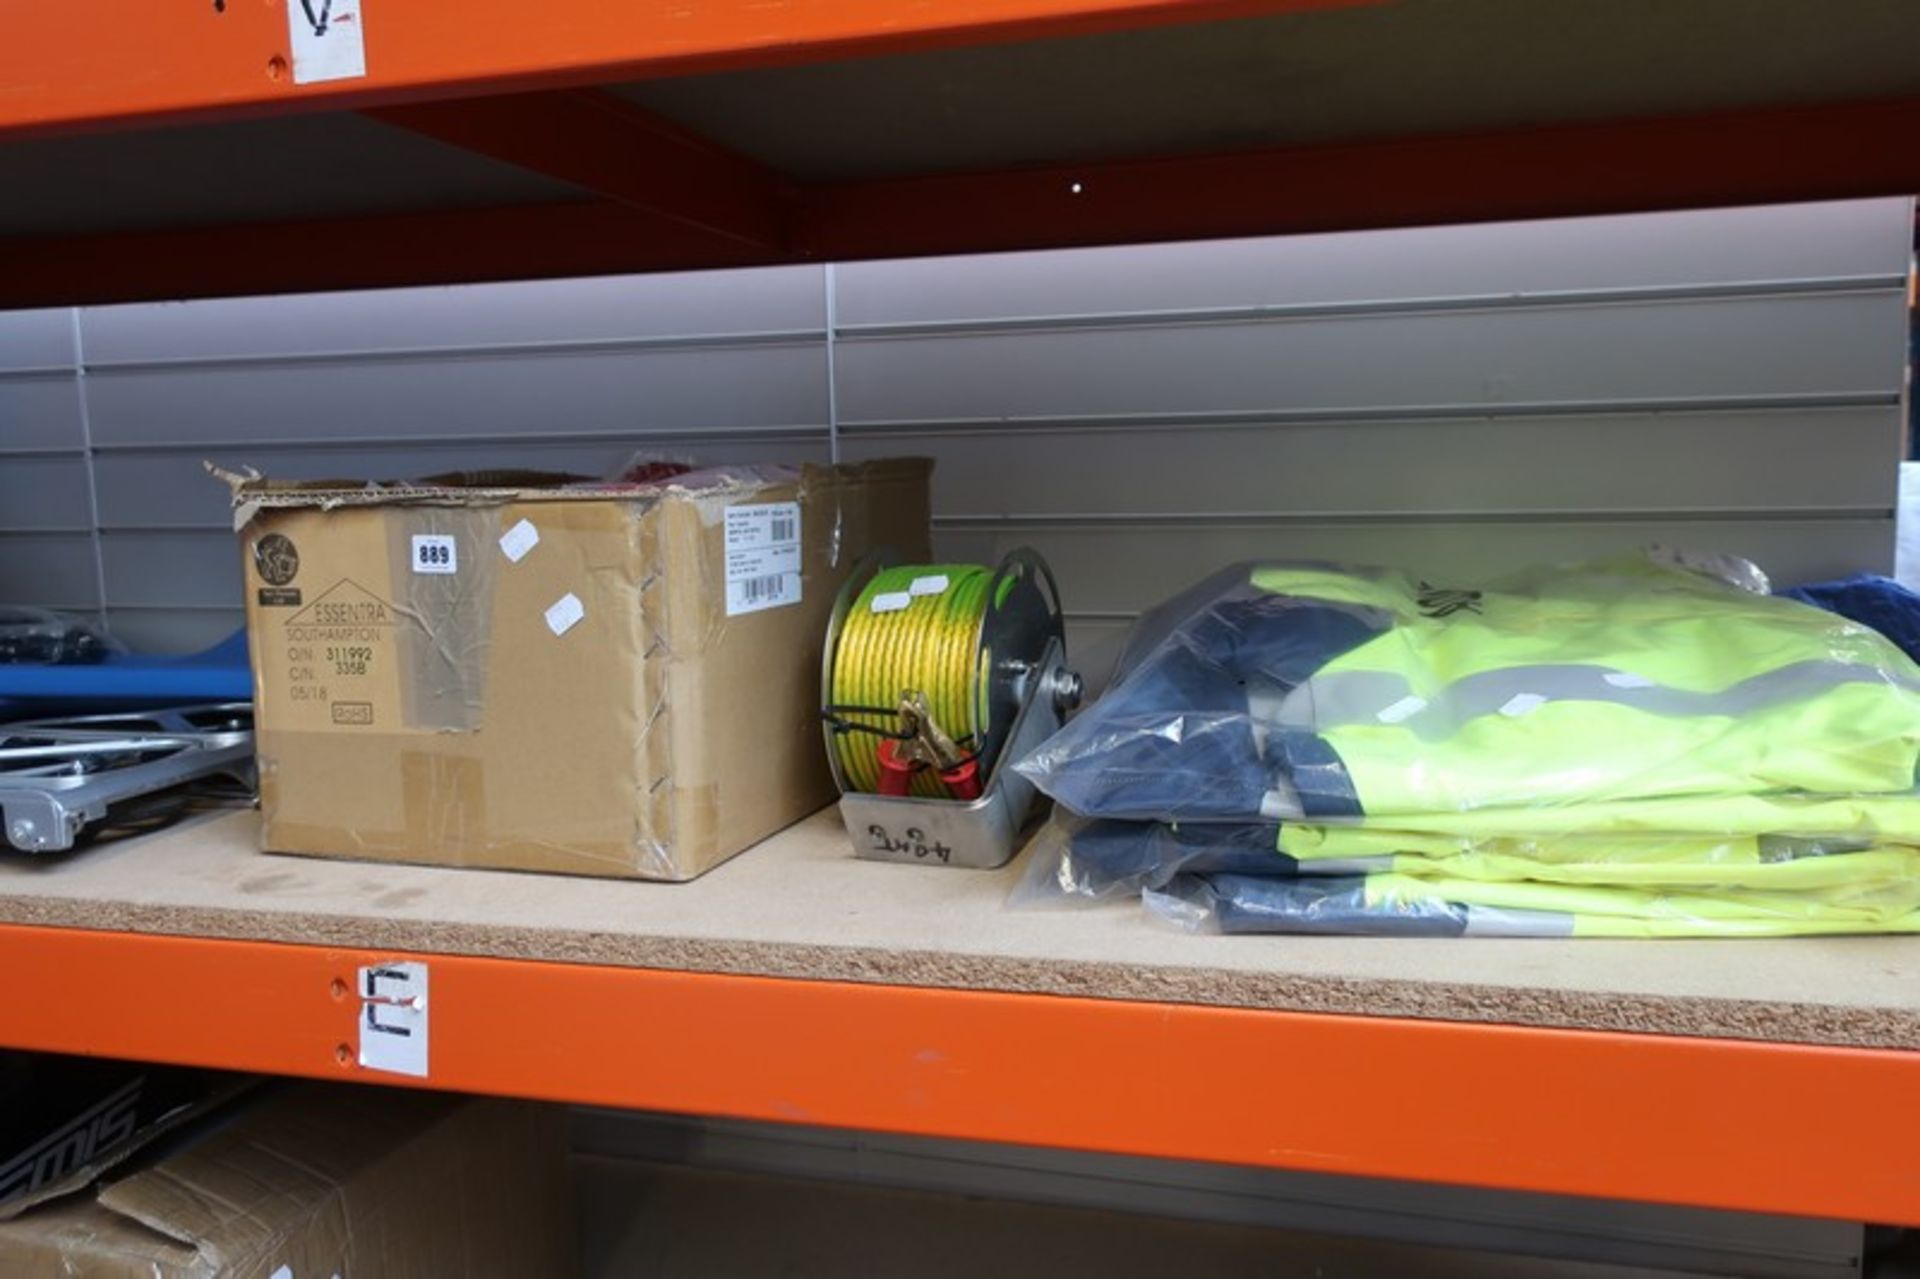 A Mac car sledge, high vis jackets, cable ties and cable reel.